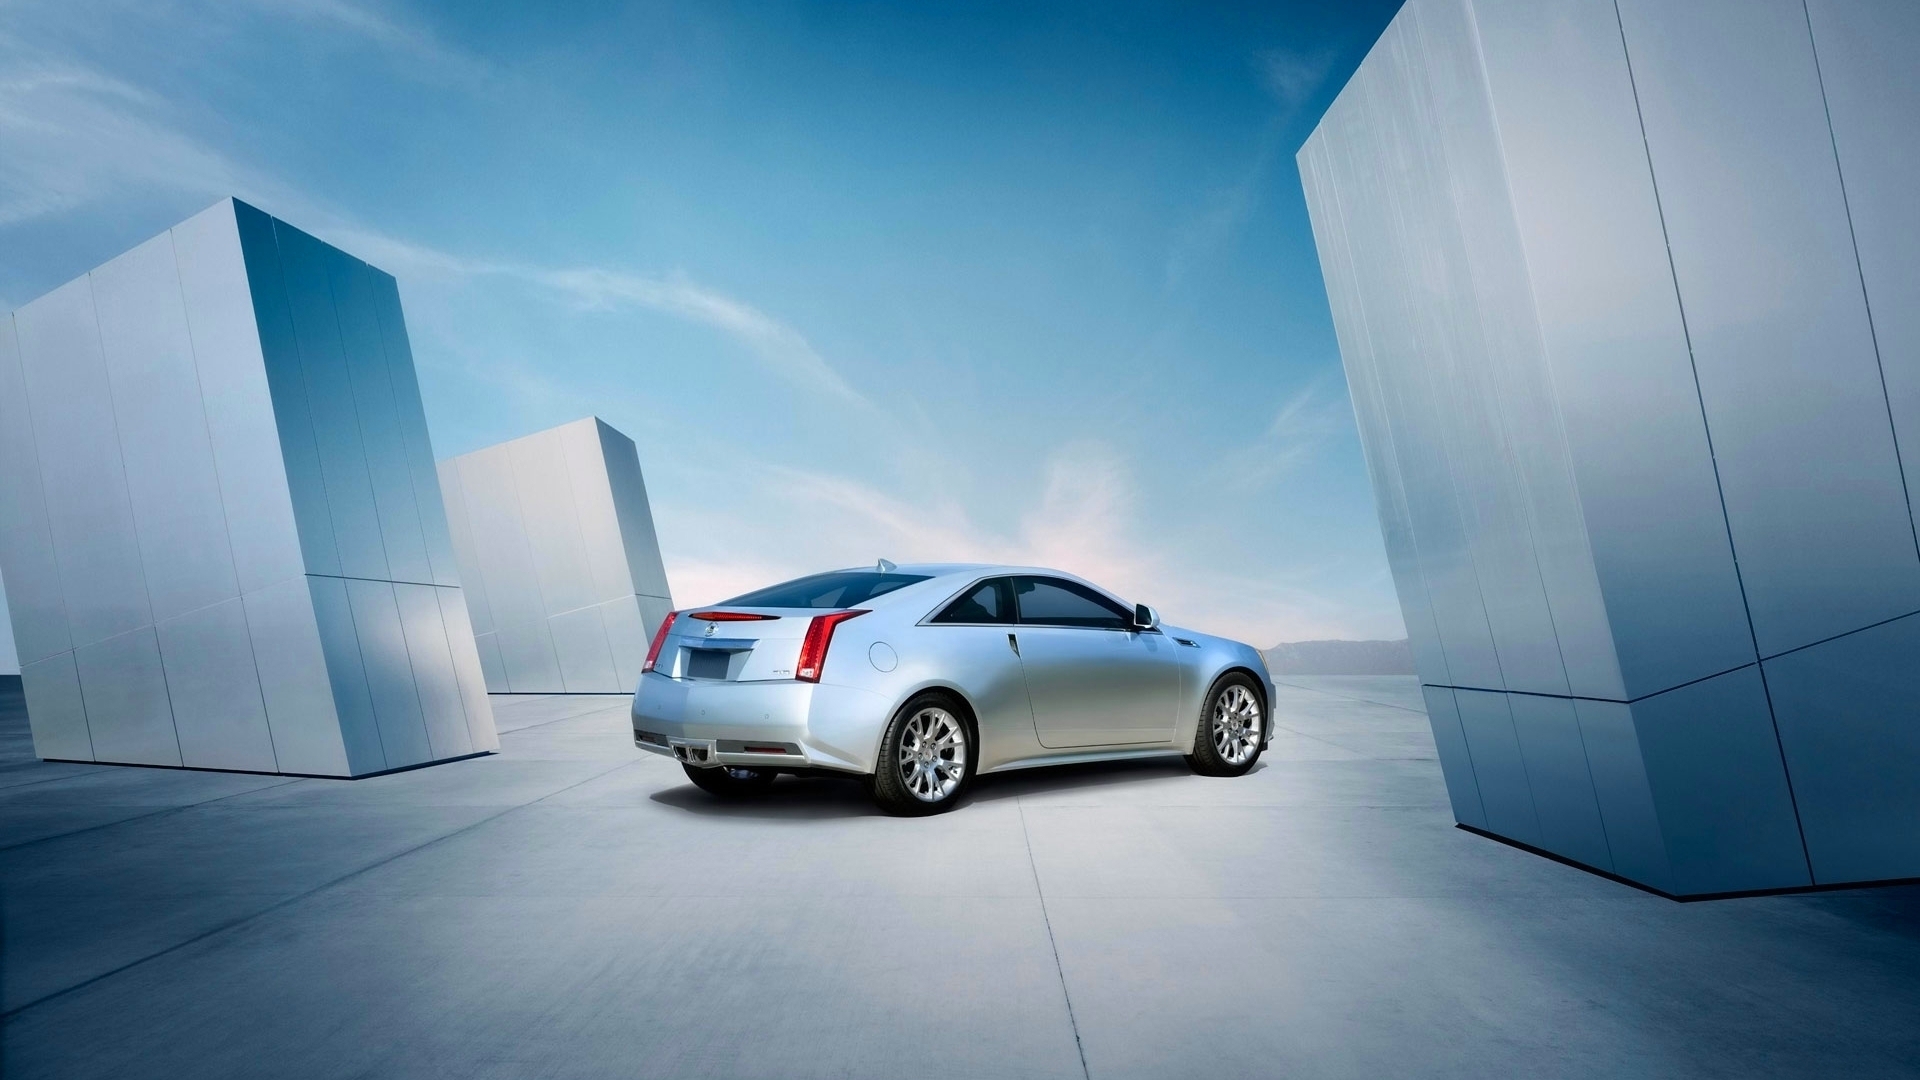 Gourgeous Cadillac CTS  for 1920 x 1080 HDTV 1080p resolution